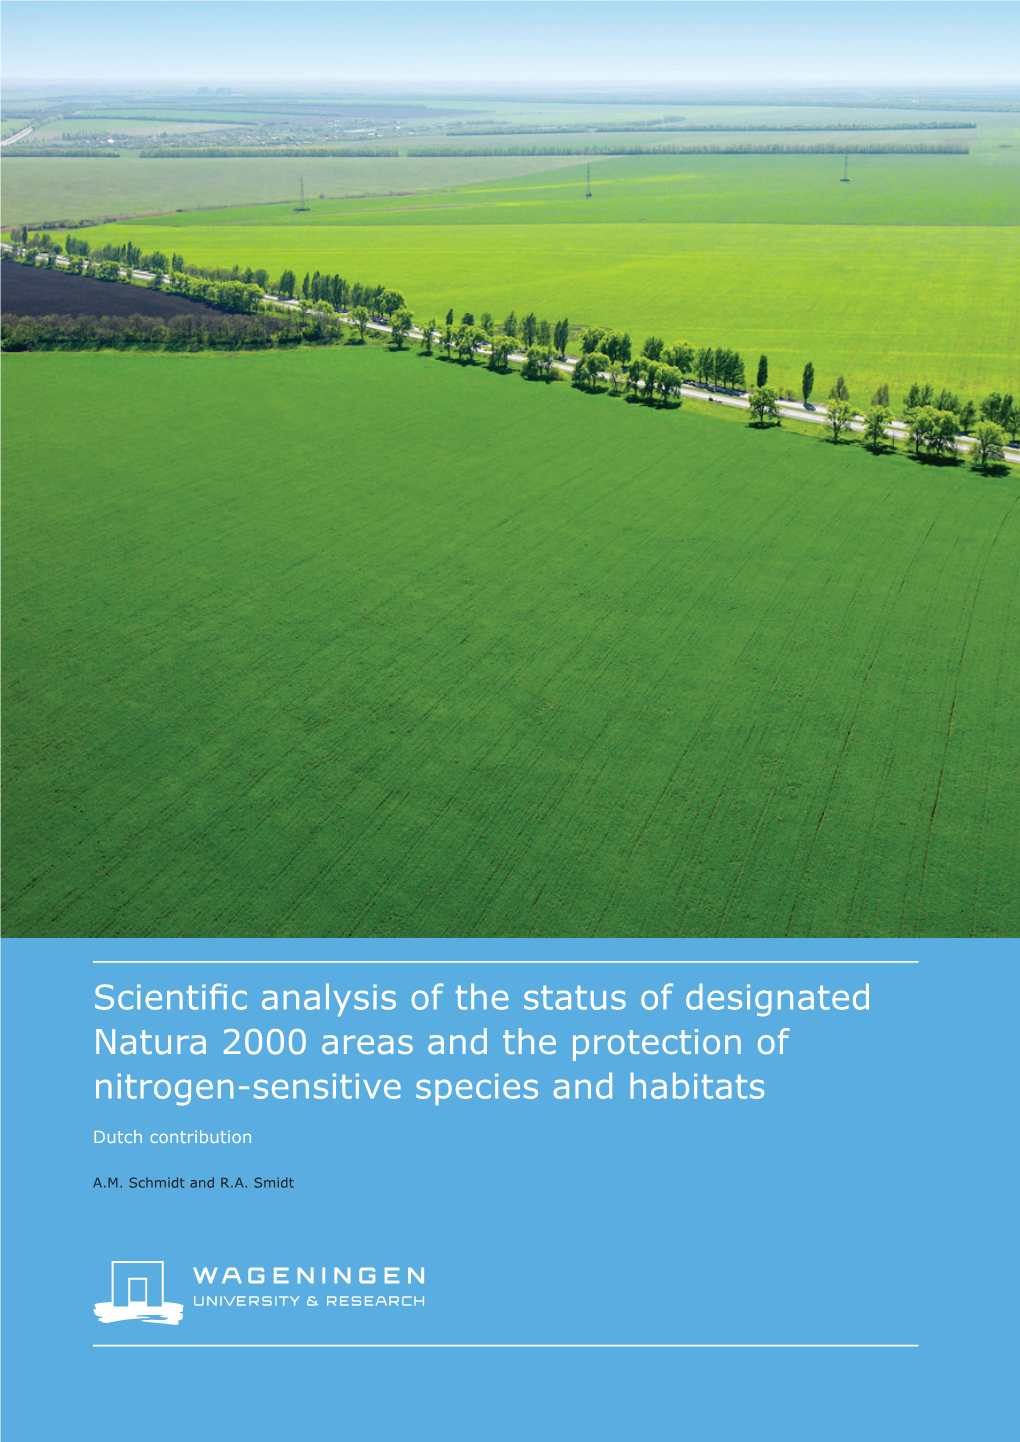 Scientific Analysis of the Status of Designated Natura 2000 Areas and the Protection of Nitrogen-Sensitive Species and Habitats